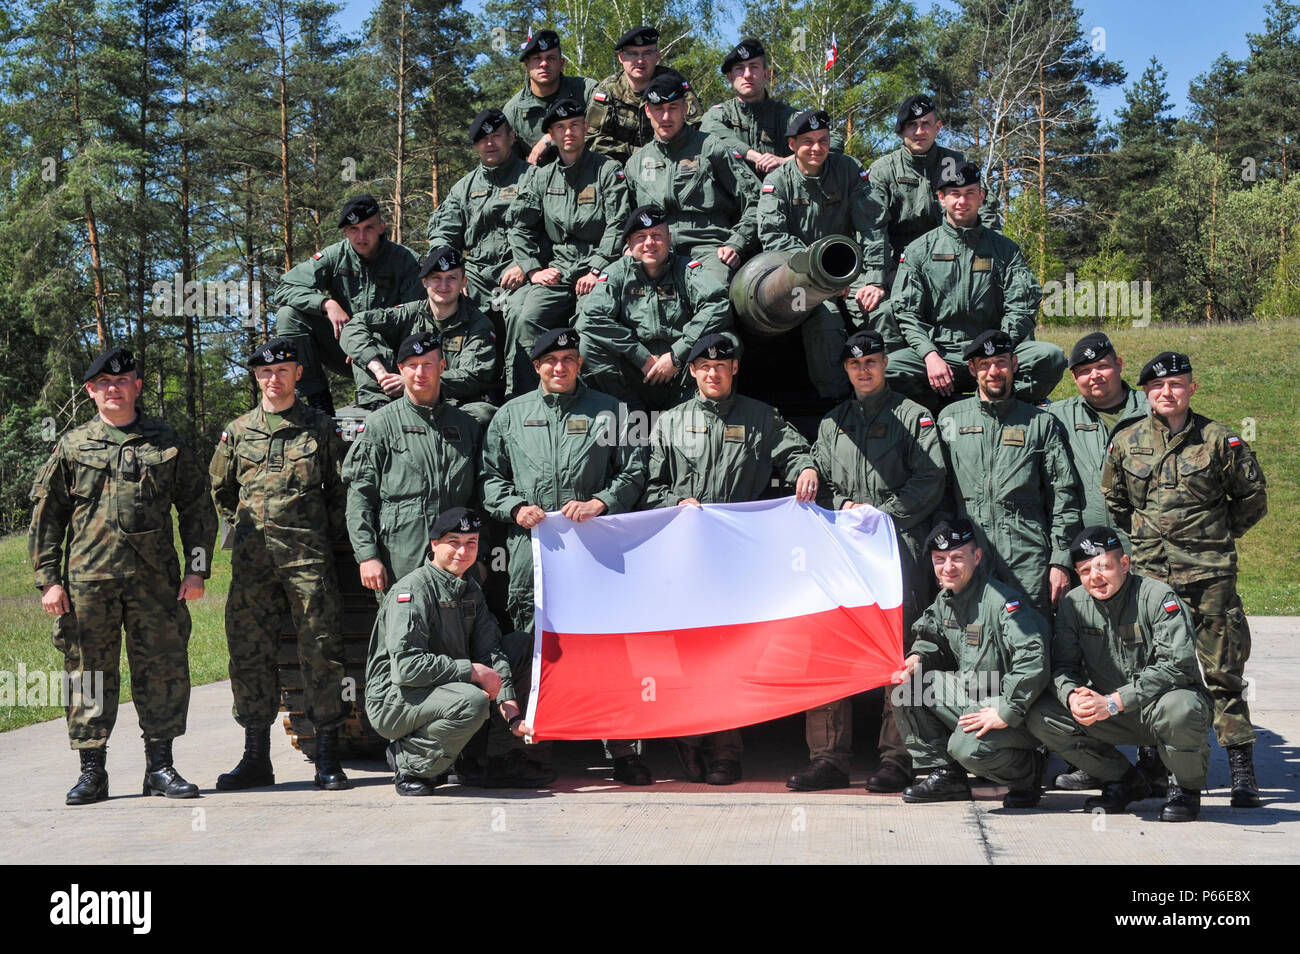 Soldiers from Poland participating in the Strong Europe Tank Challenge (SETC) pose for a group photo May 08, 2016 at Grafenwoehr Training Area, Germany. The SETC is co-hosted by U.S. Army Europe and the German Bundeswehr May 10-13, 2016. The competition is designed to foster military partnership while promoting NATO interoperability. Seven platoons from six NATO nations are competing in SETC - the first multinational tank challenge at Grafenwoehr in 25 years. For more photos, videos and stories from the Strong Europe Tank Challenge, go to http://www.eur.army.mil/tankchallenge/ (U.S. Army photo Stock Photo